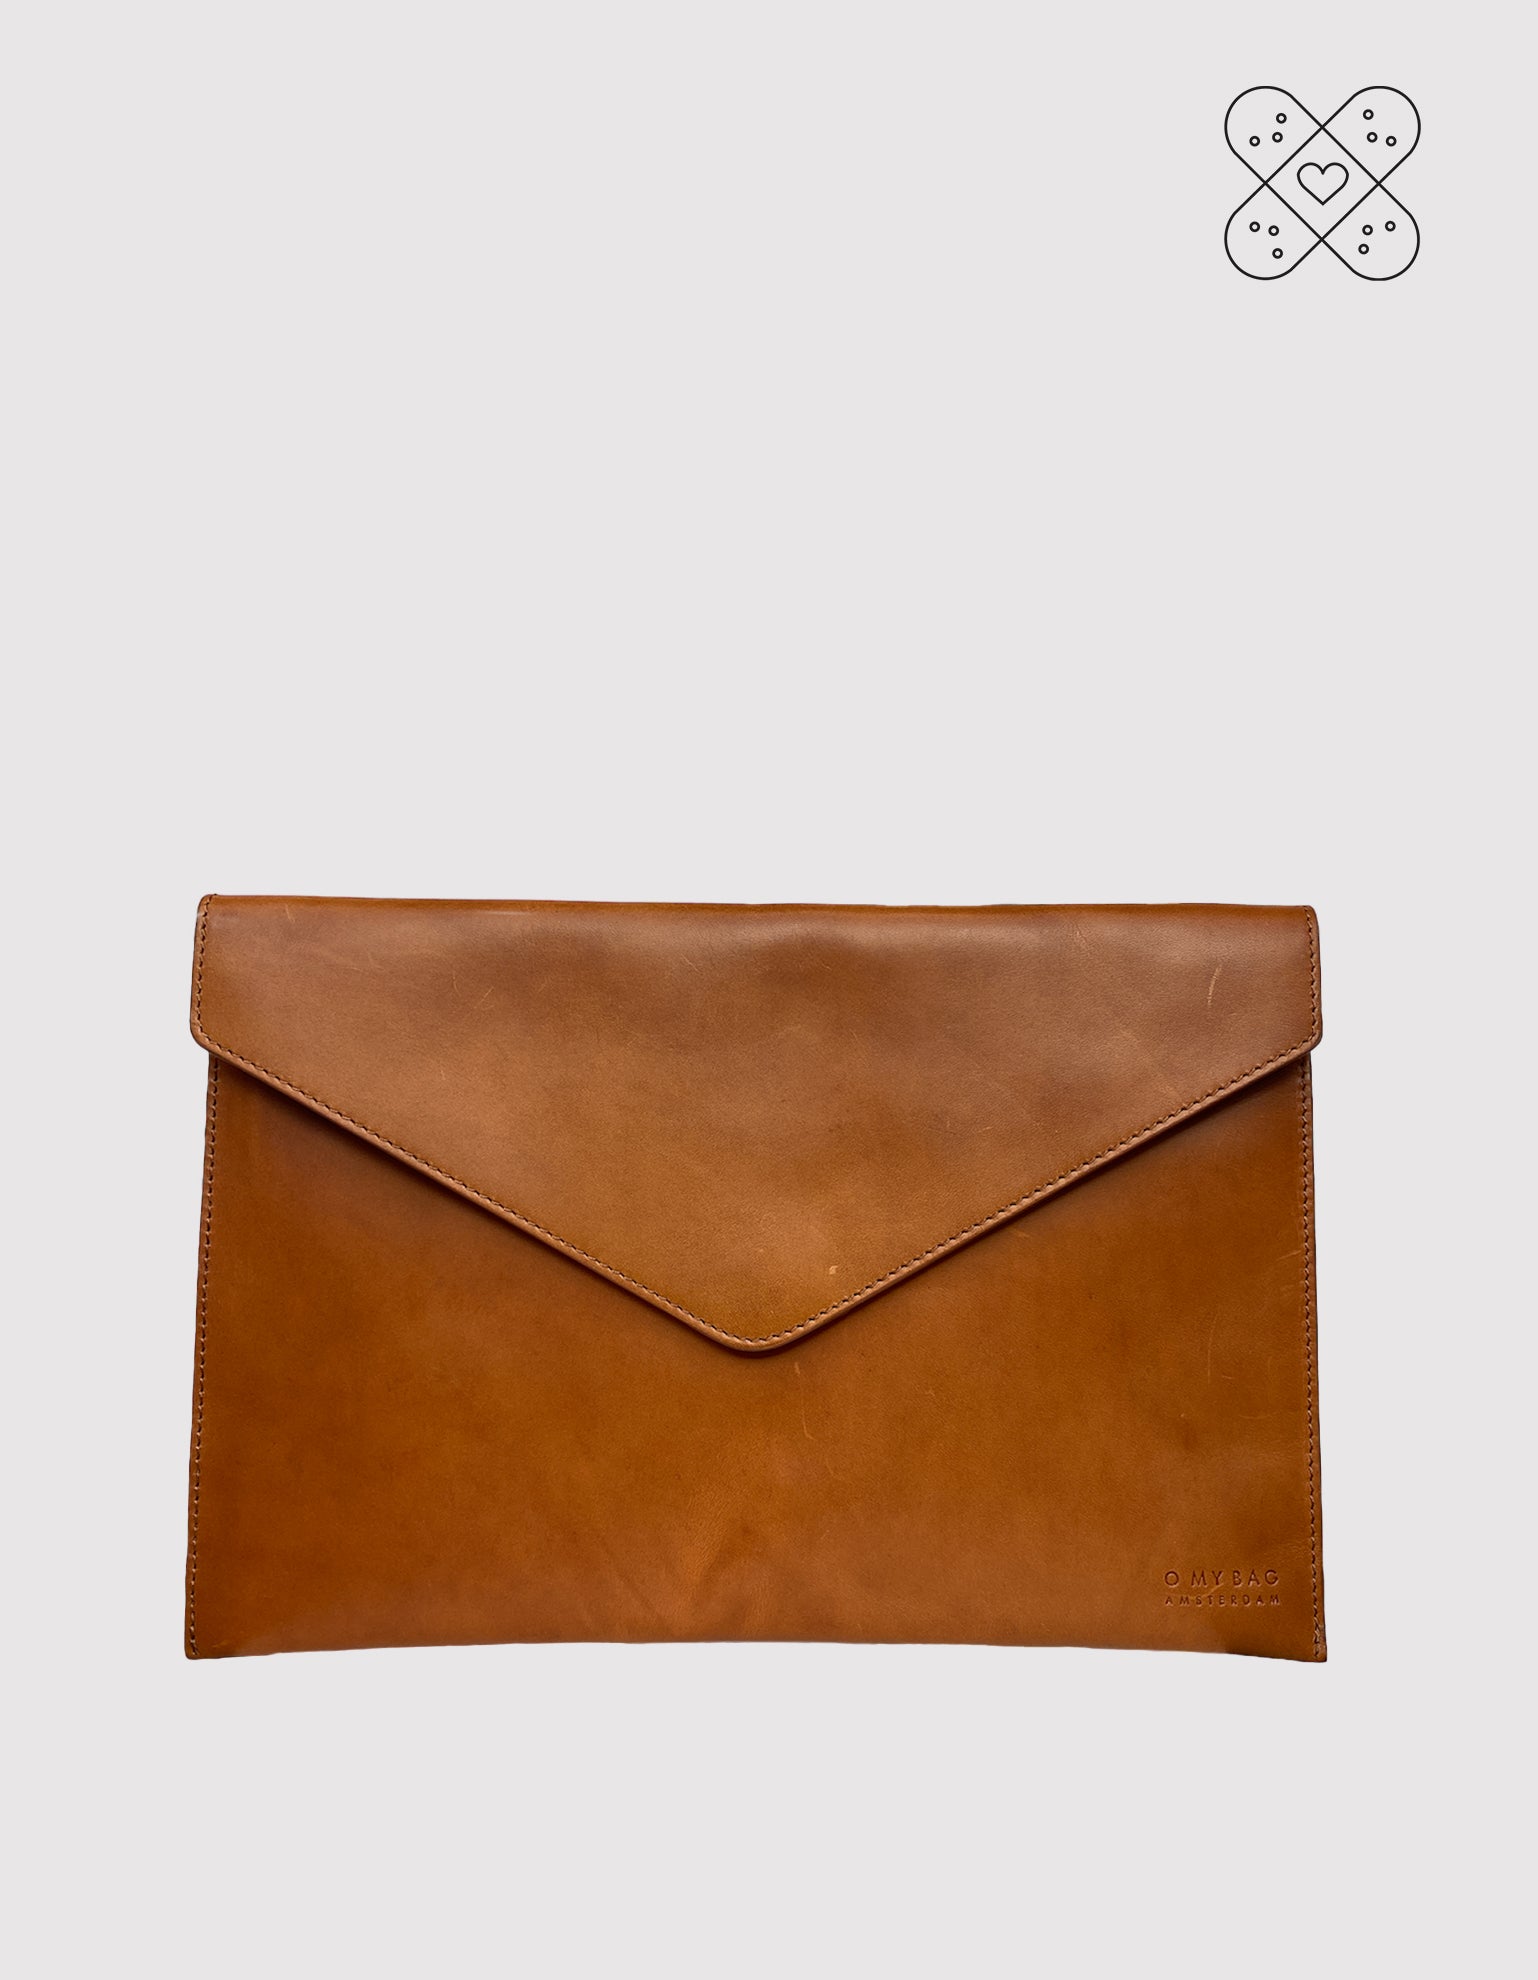 Perfectly Imperfect Envelope Laptop Sleeve 13" - Cognac Classic Leather